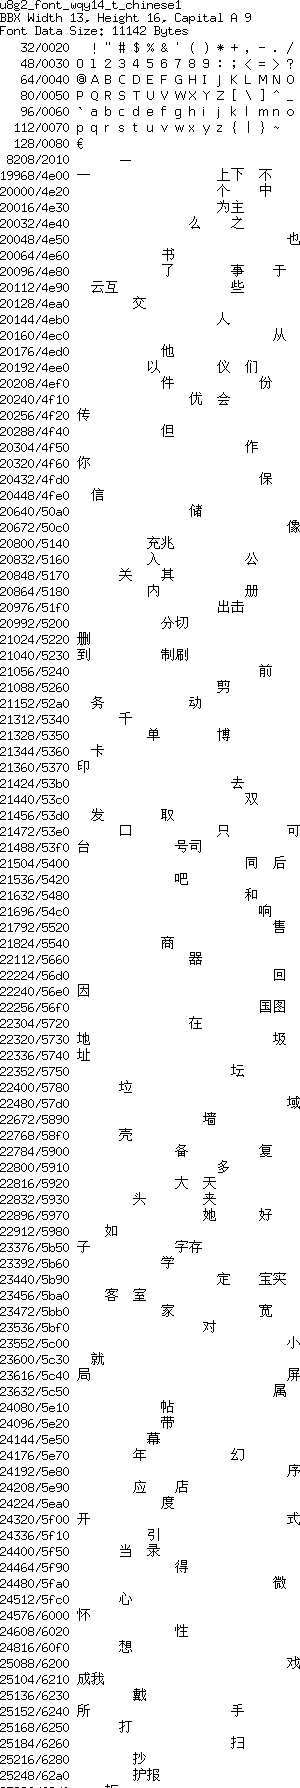 fntpic/u8g2_font_wqy14_t_chinese1.png